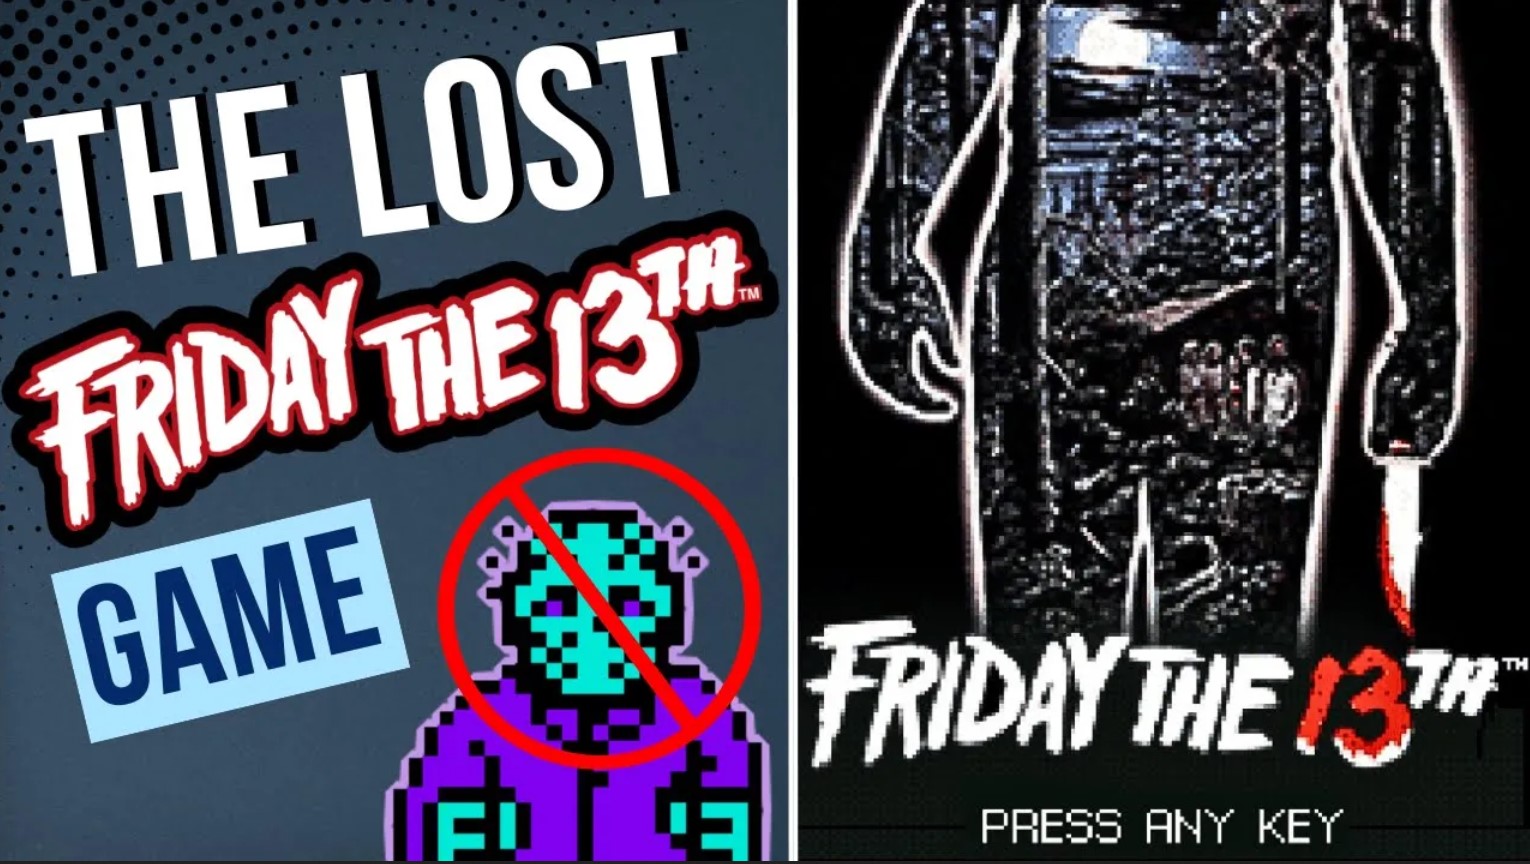 The Lost & Forgotten Friday The 13th Game